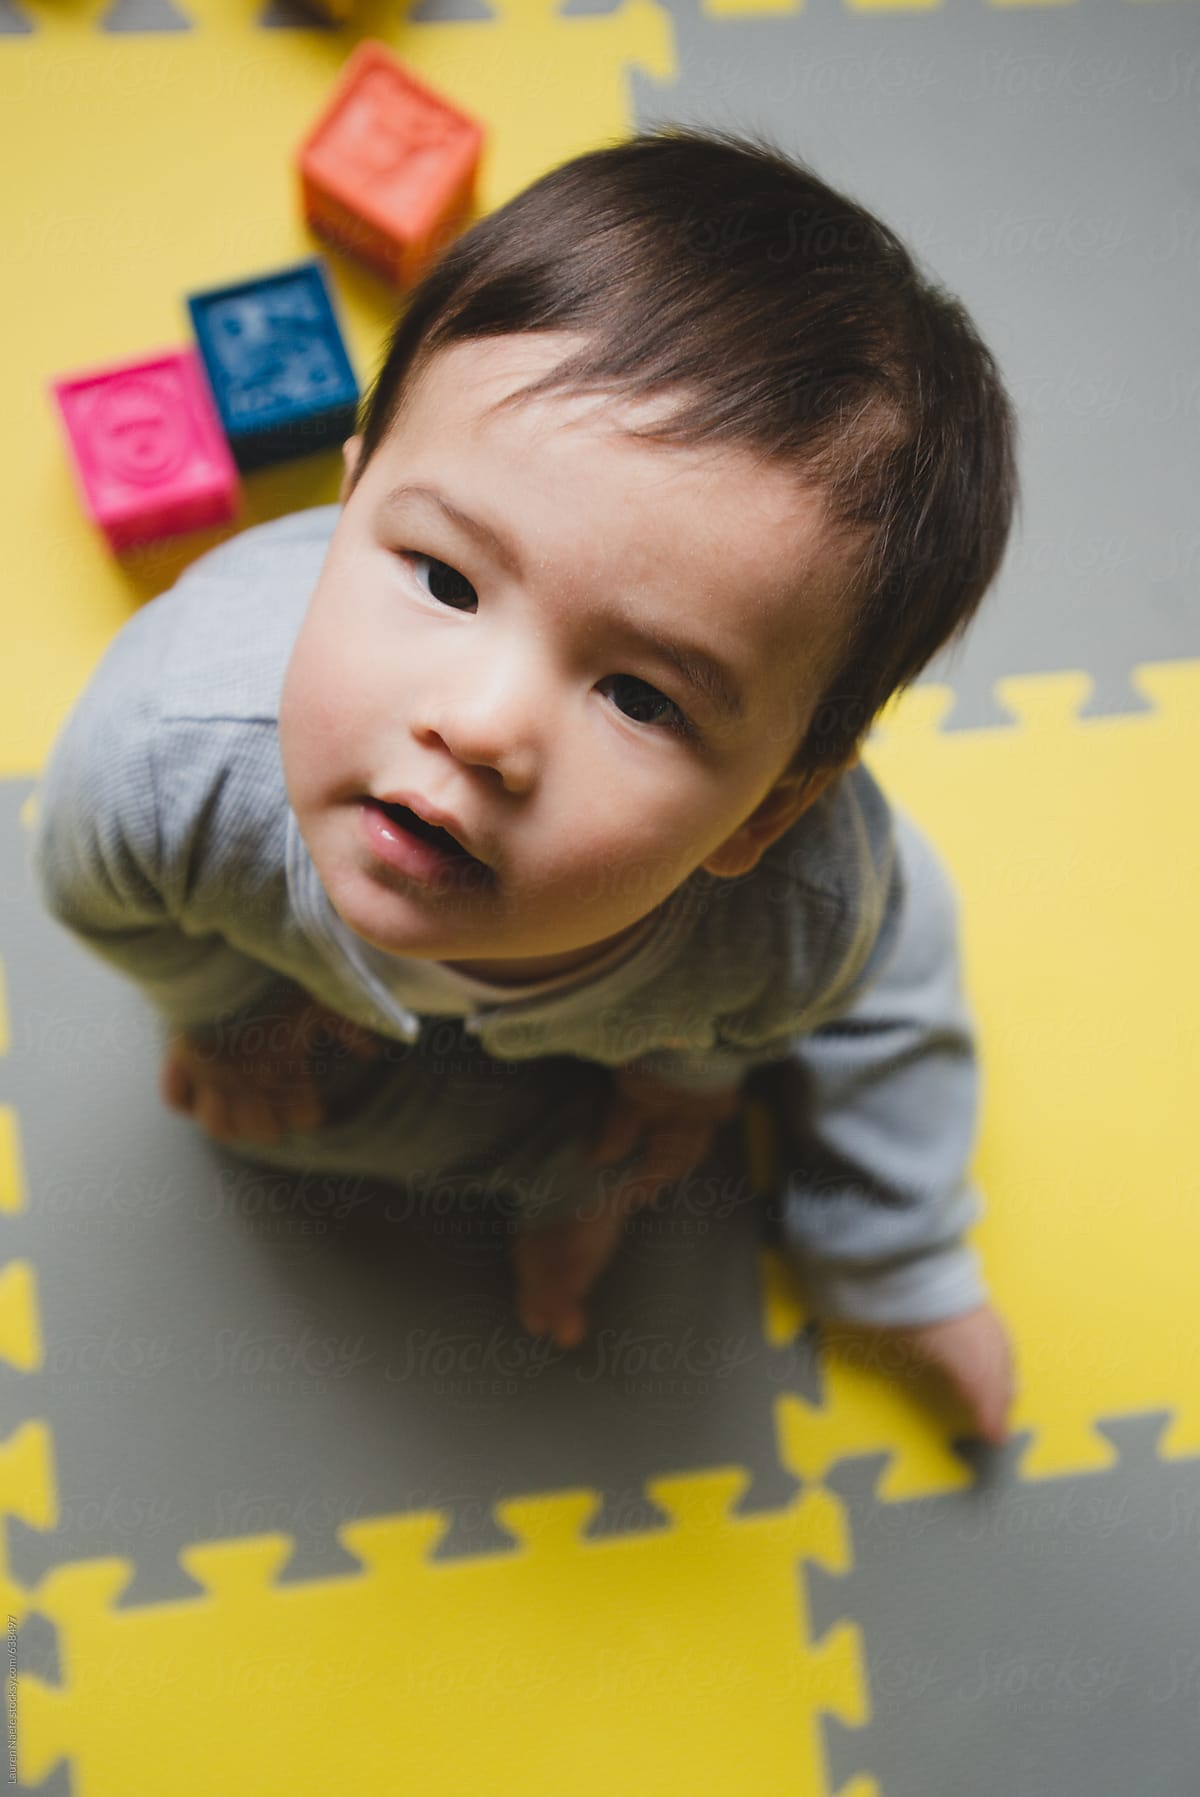 Baby on play mat